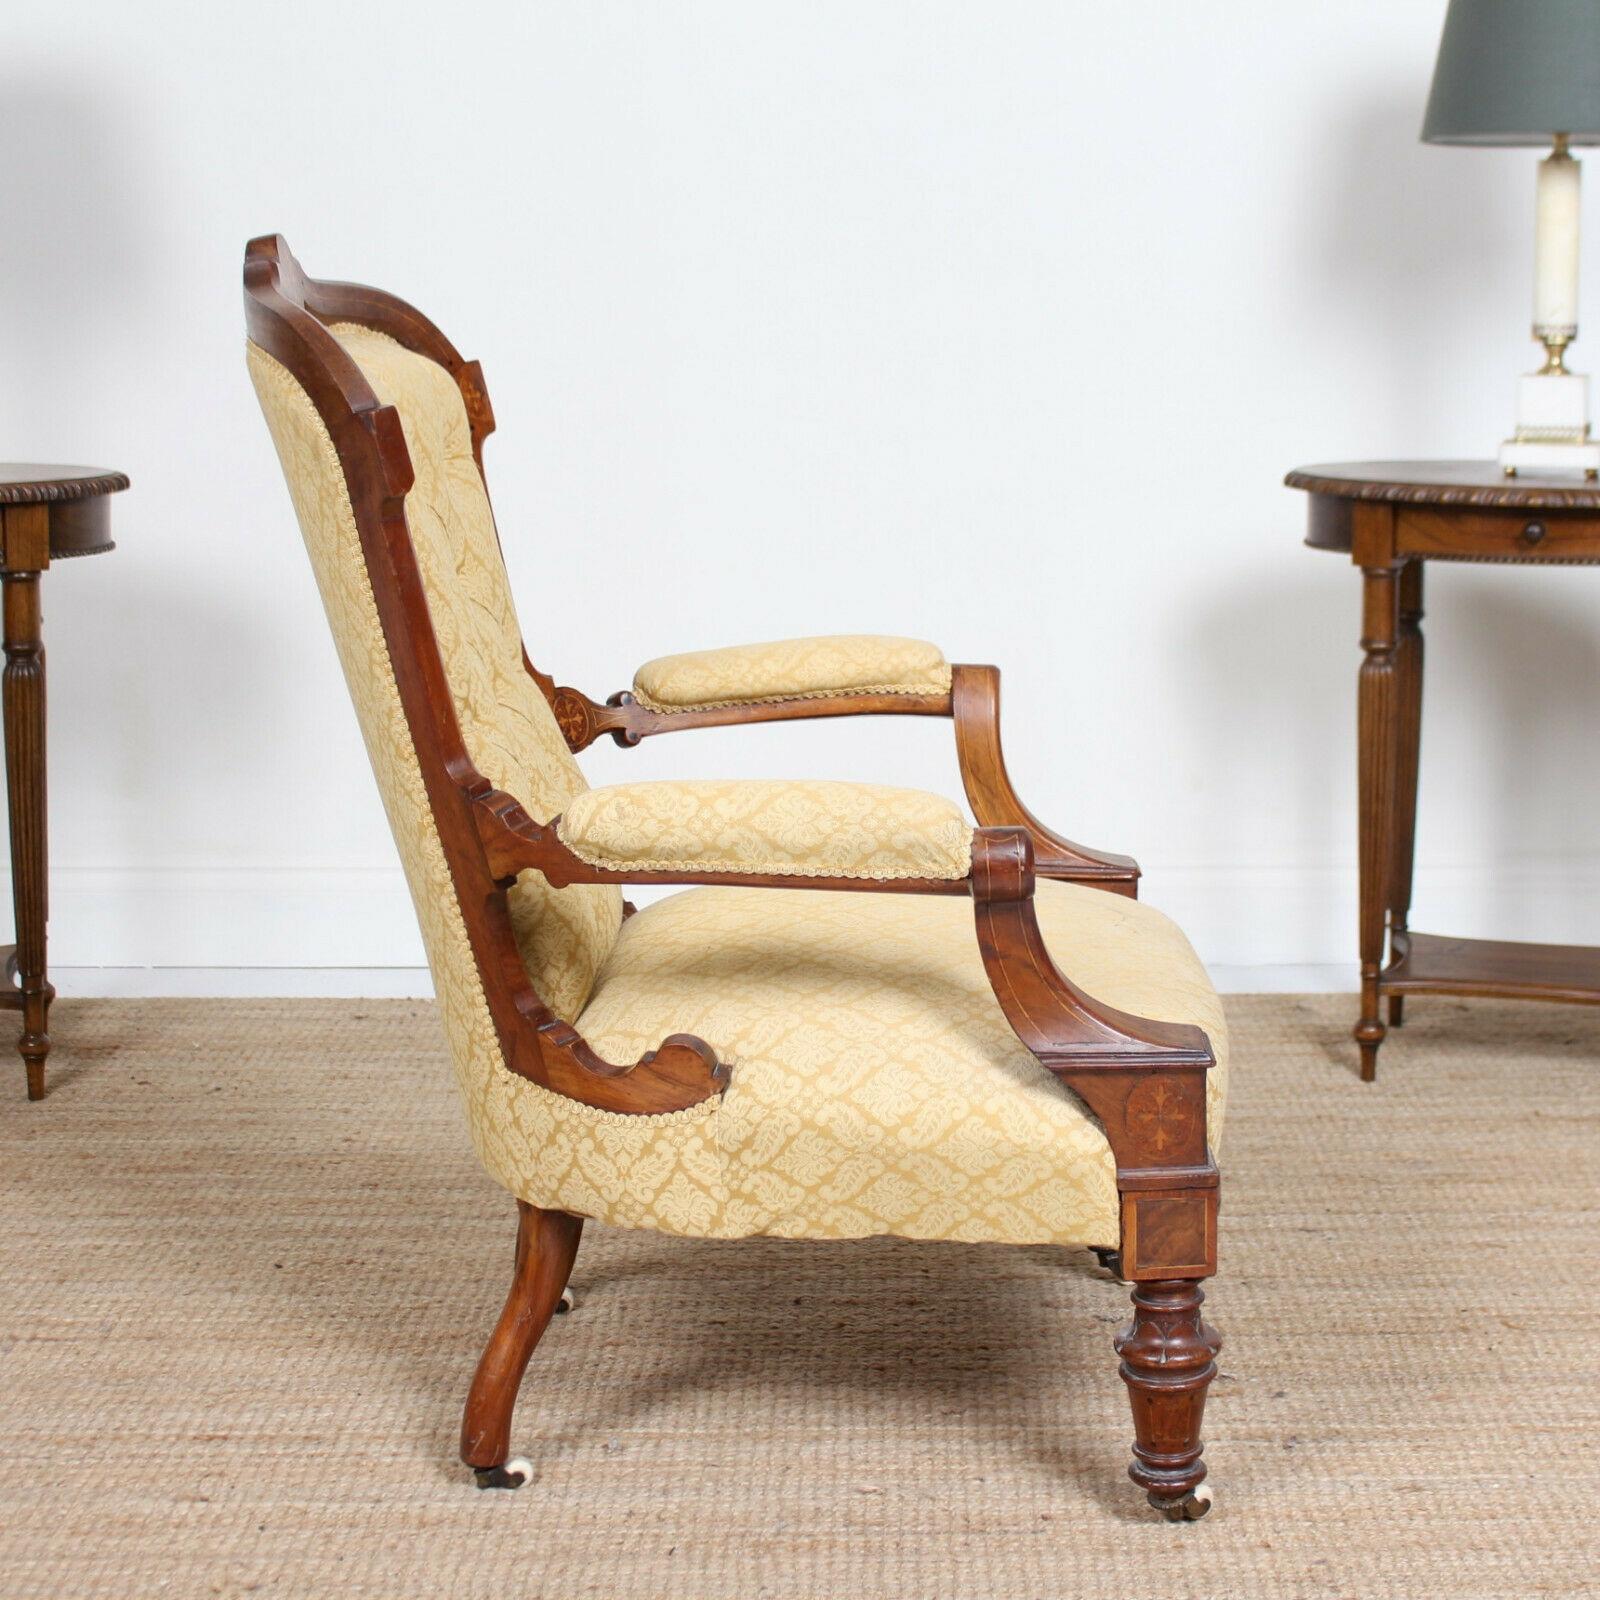 English Inlaid Walnut Armchair 19th Century Lounge Chair For Sale 2